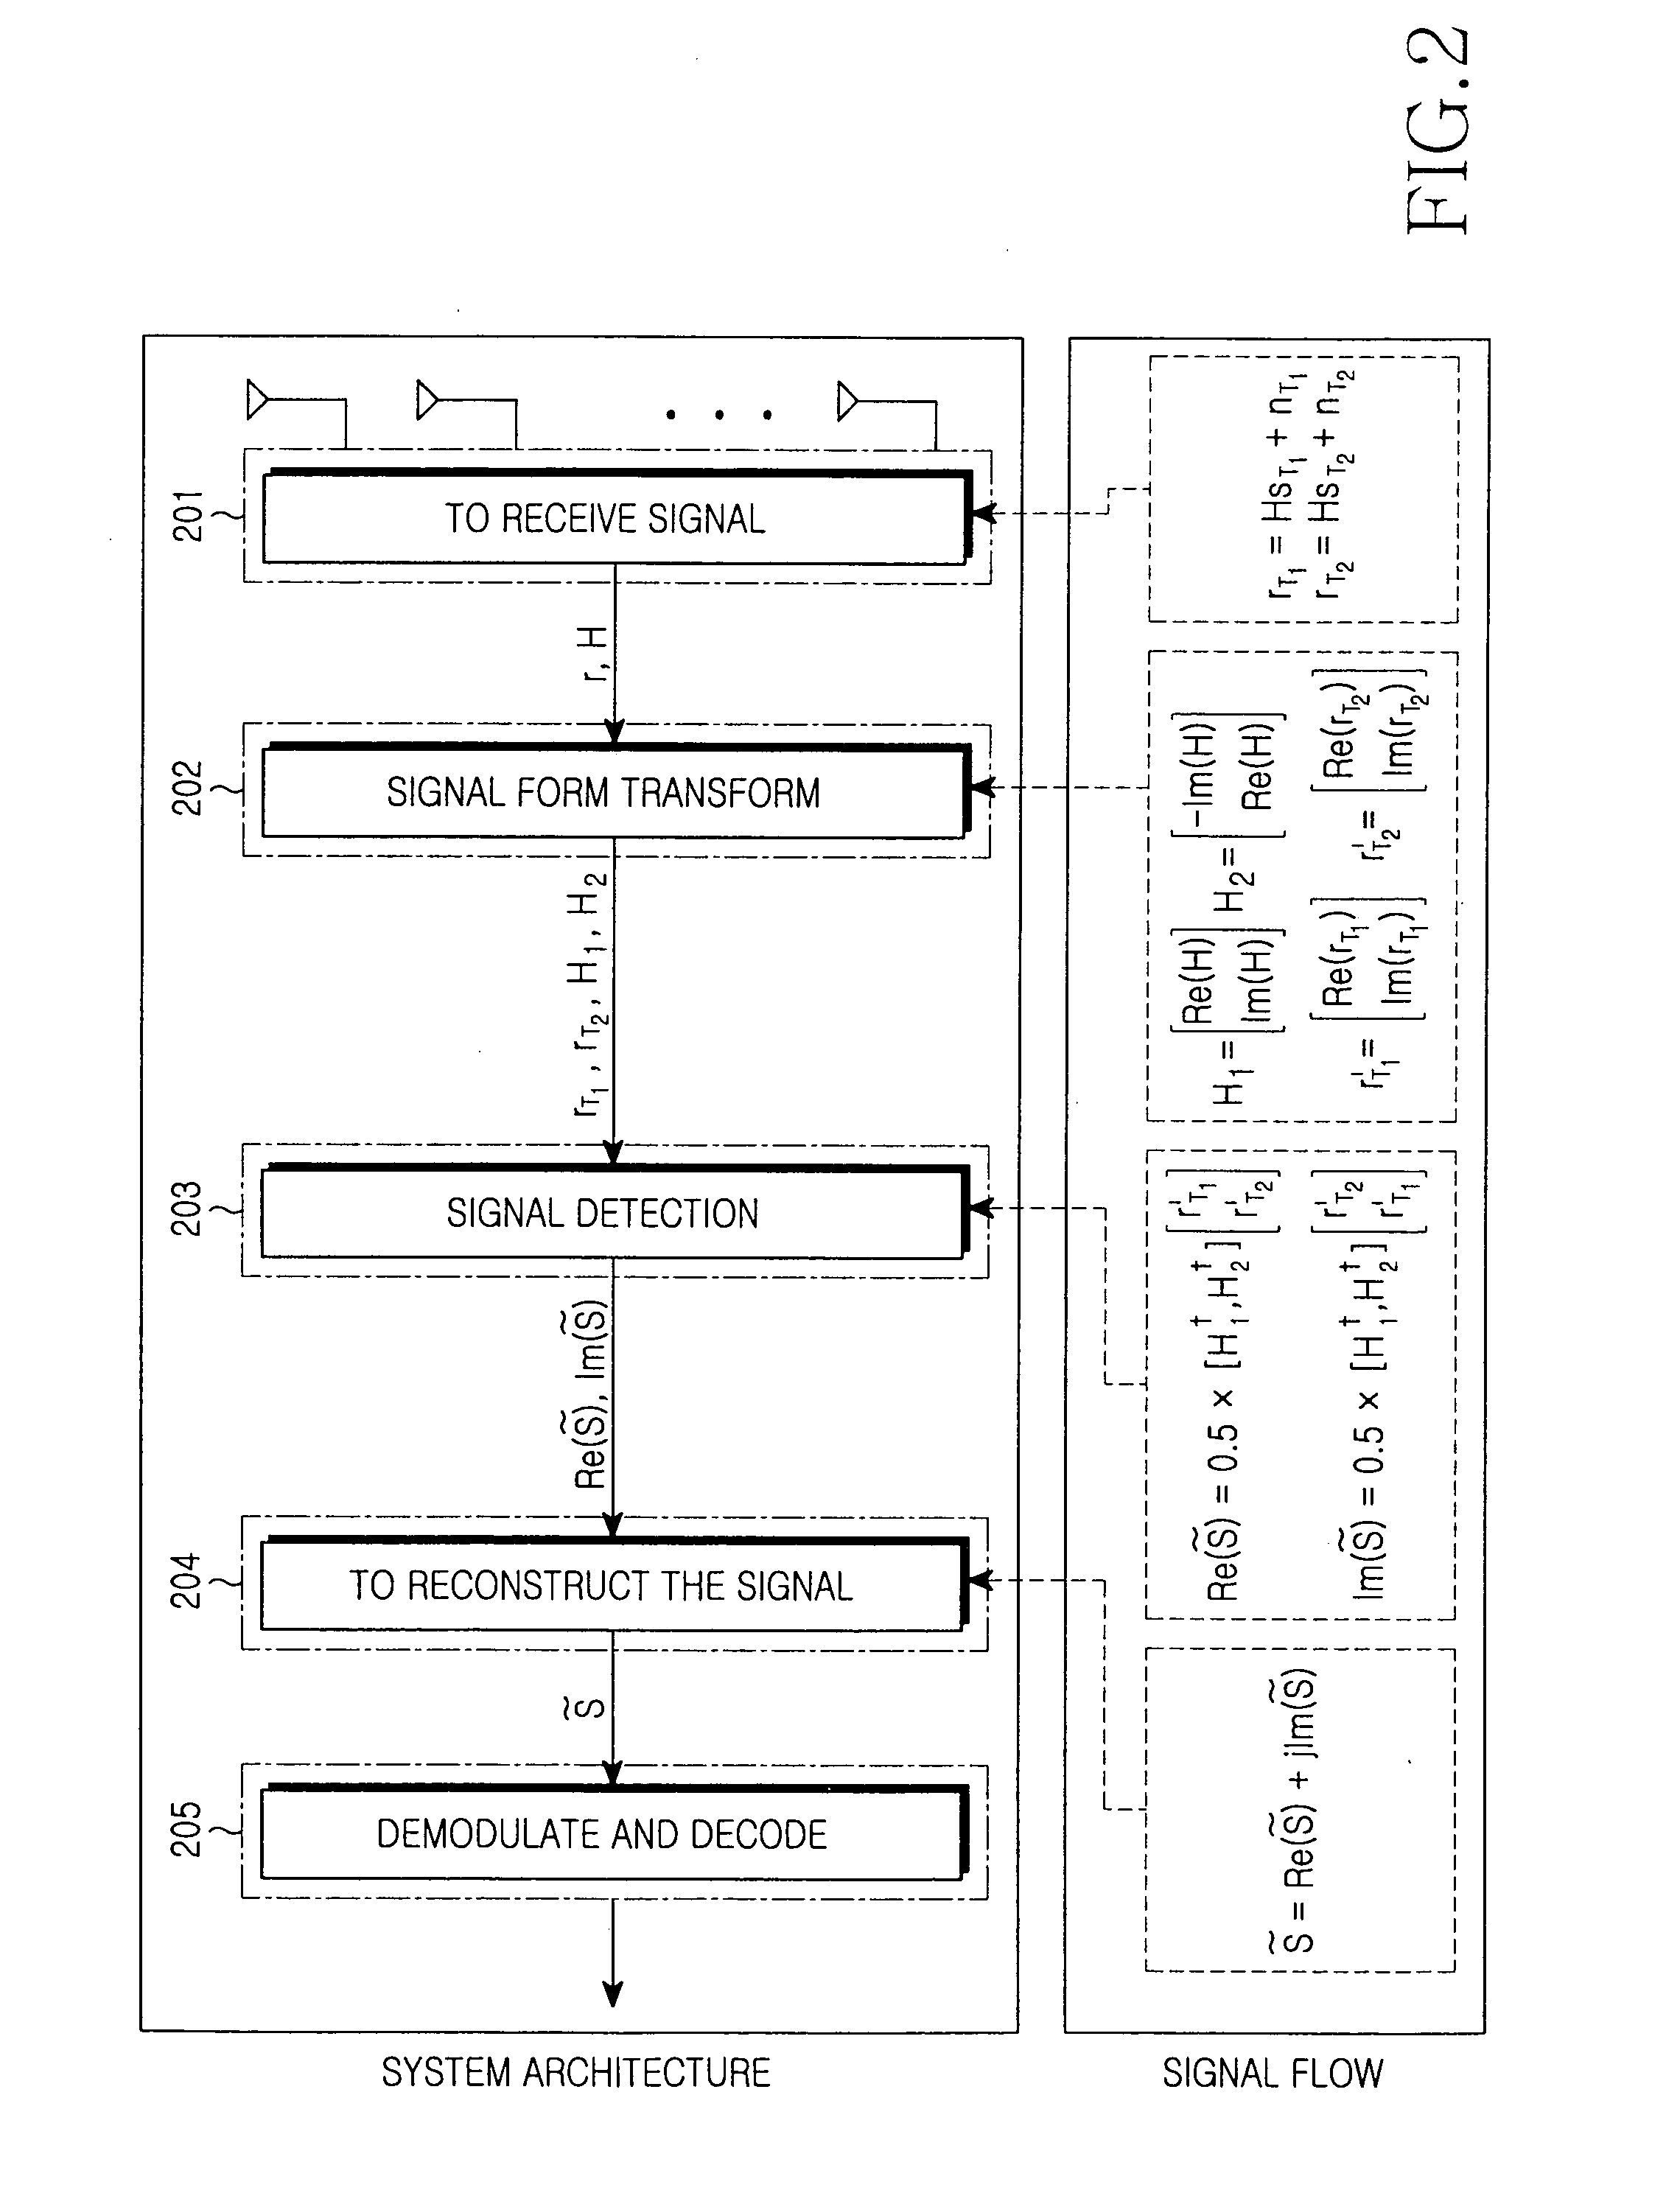 Multiple-antenna space multiplexing system using enhancement signal detection